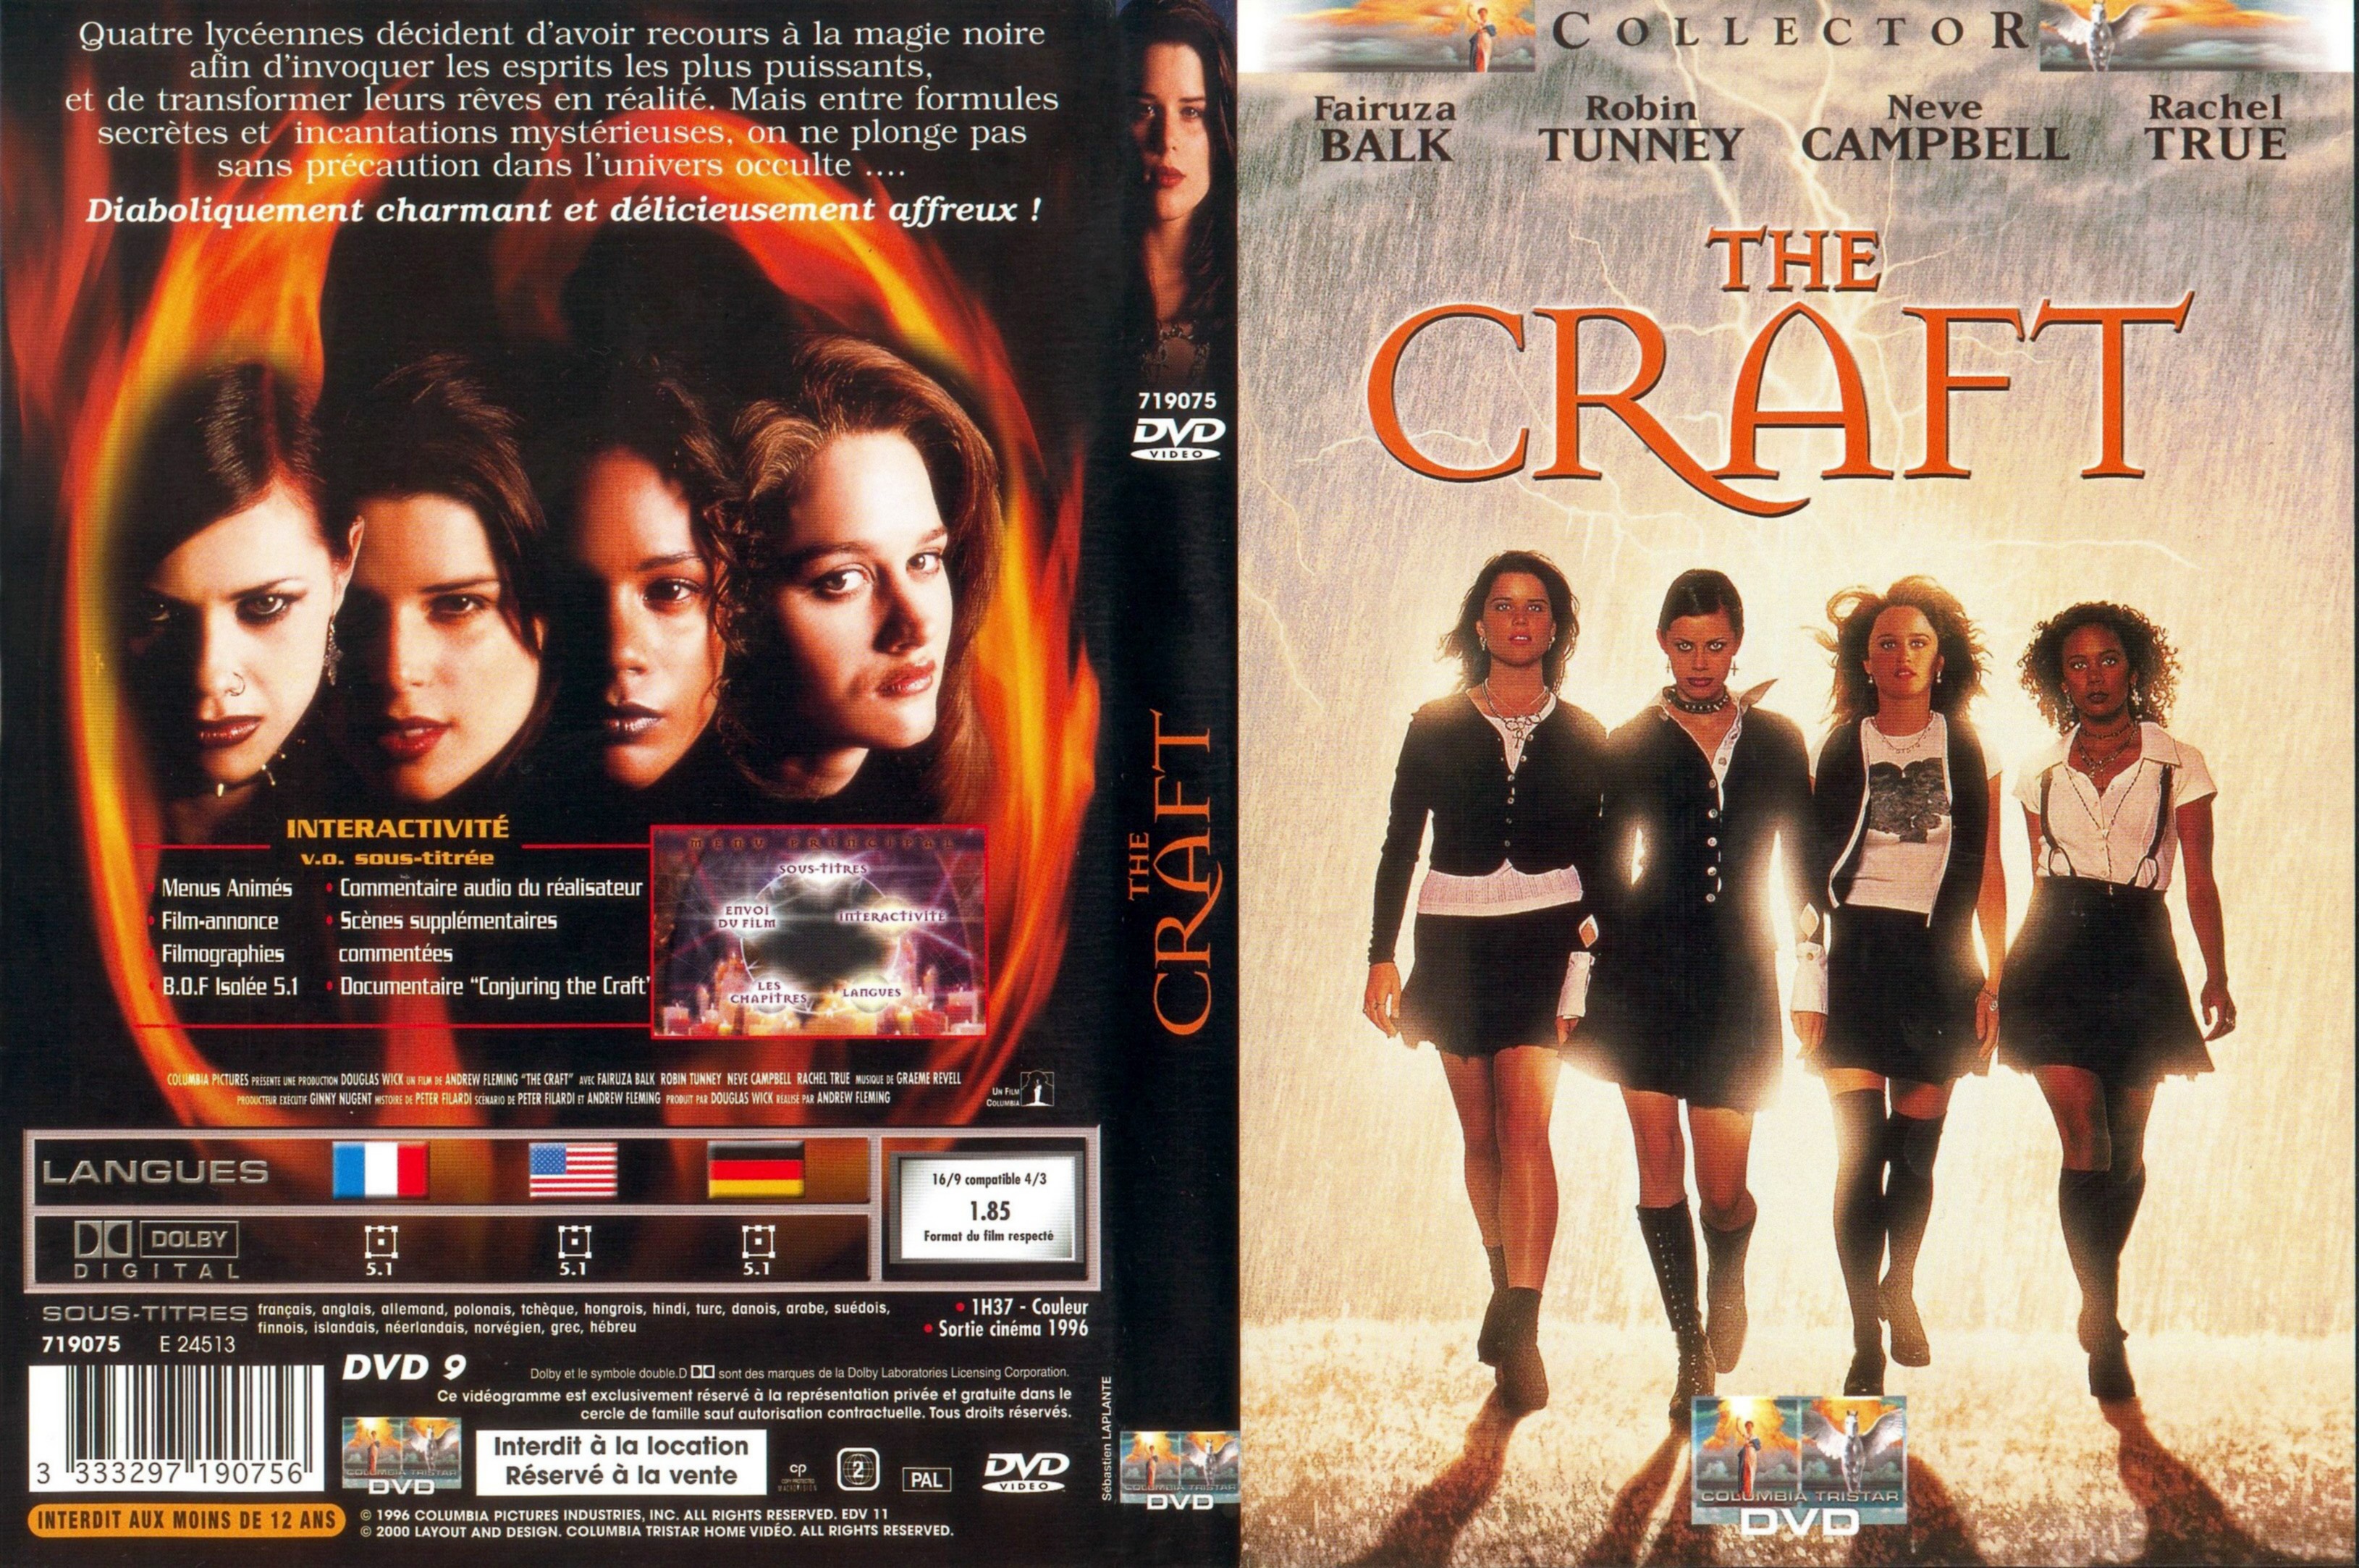 Jaquette DVD The craft